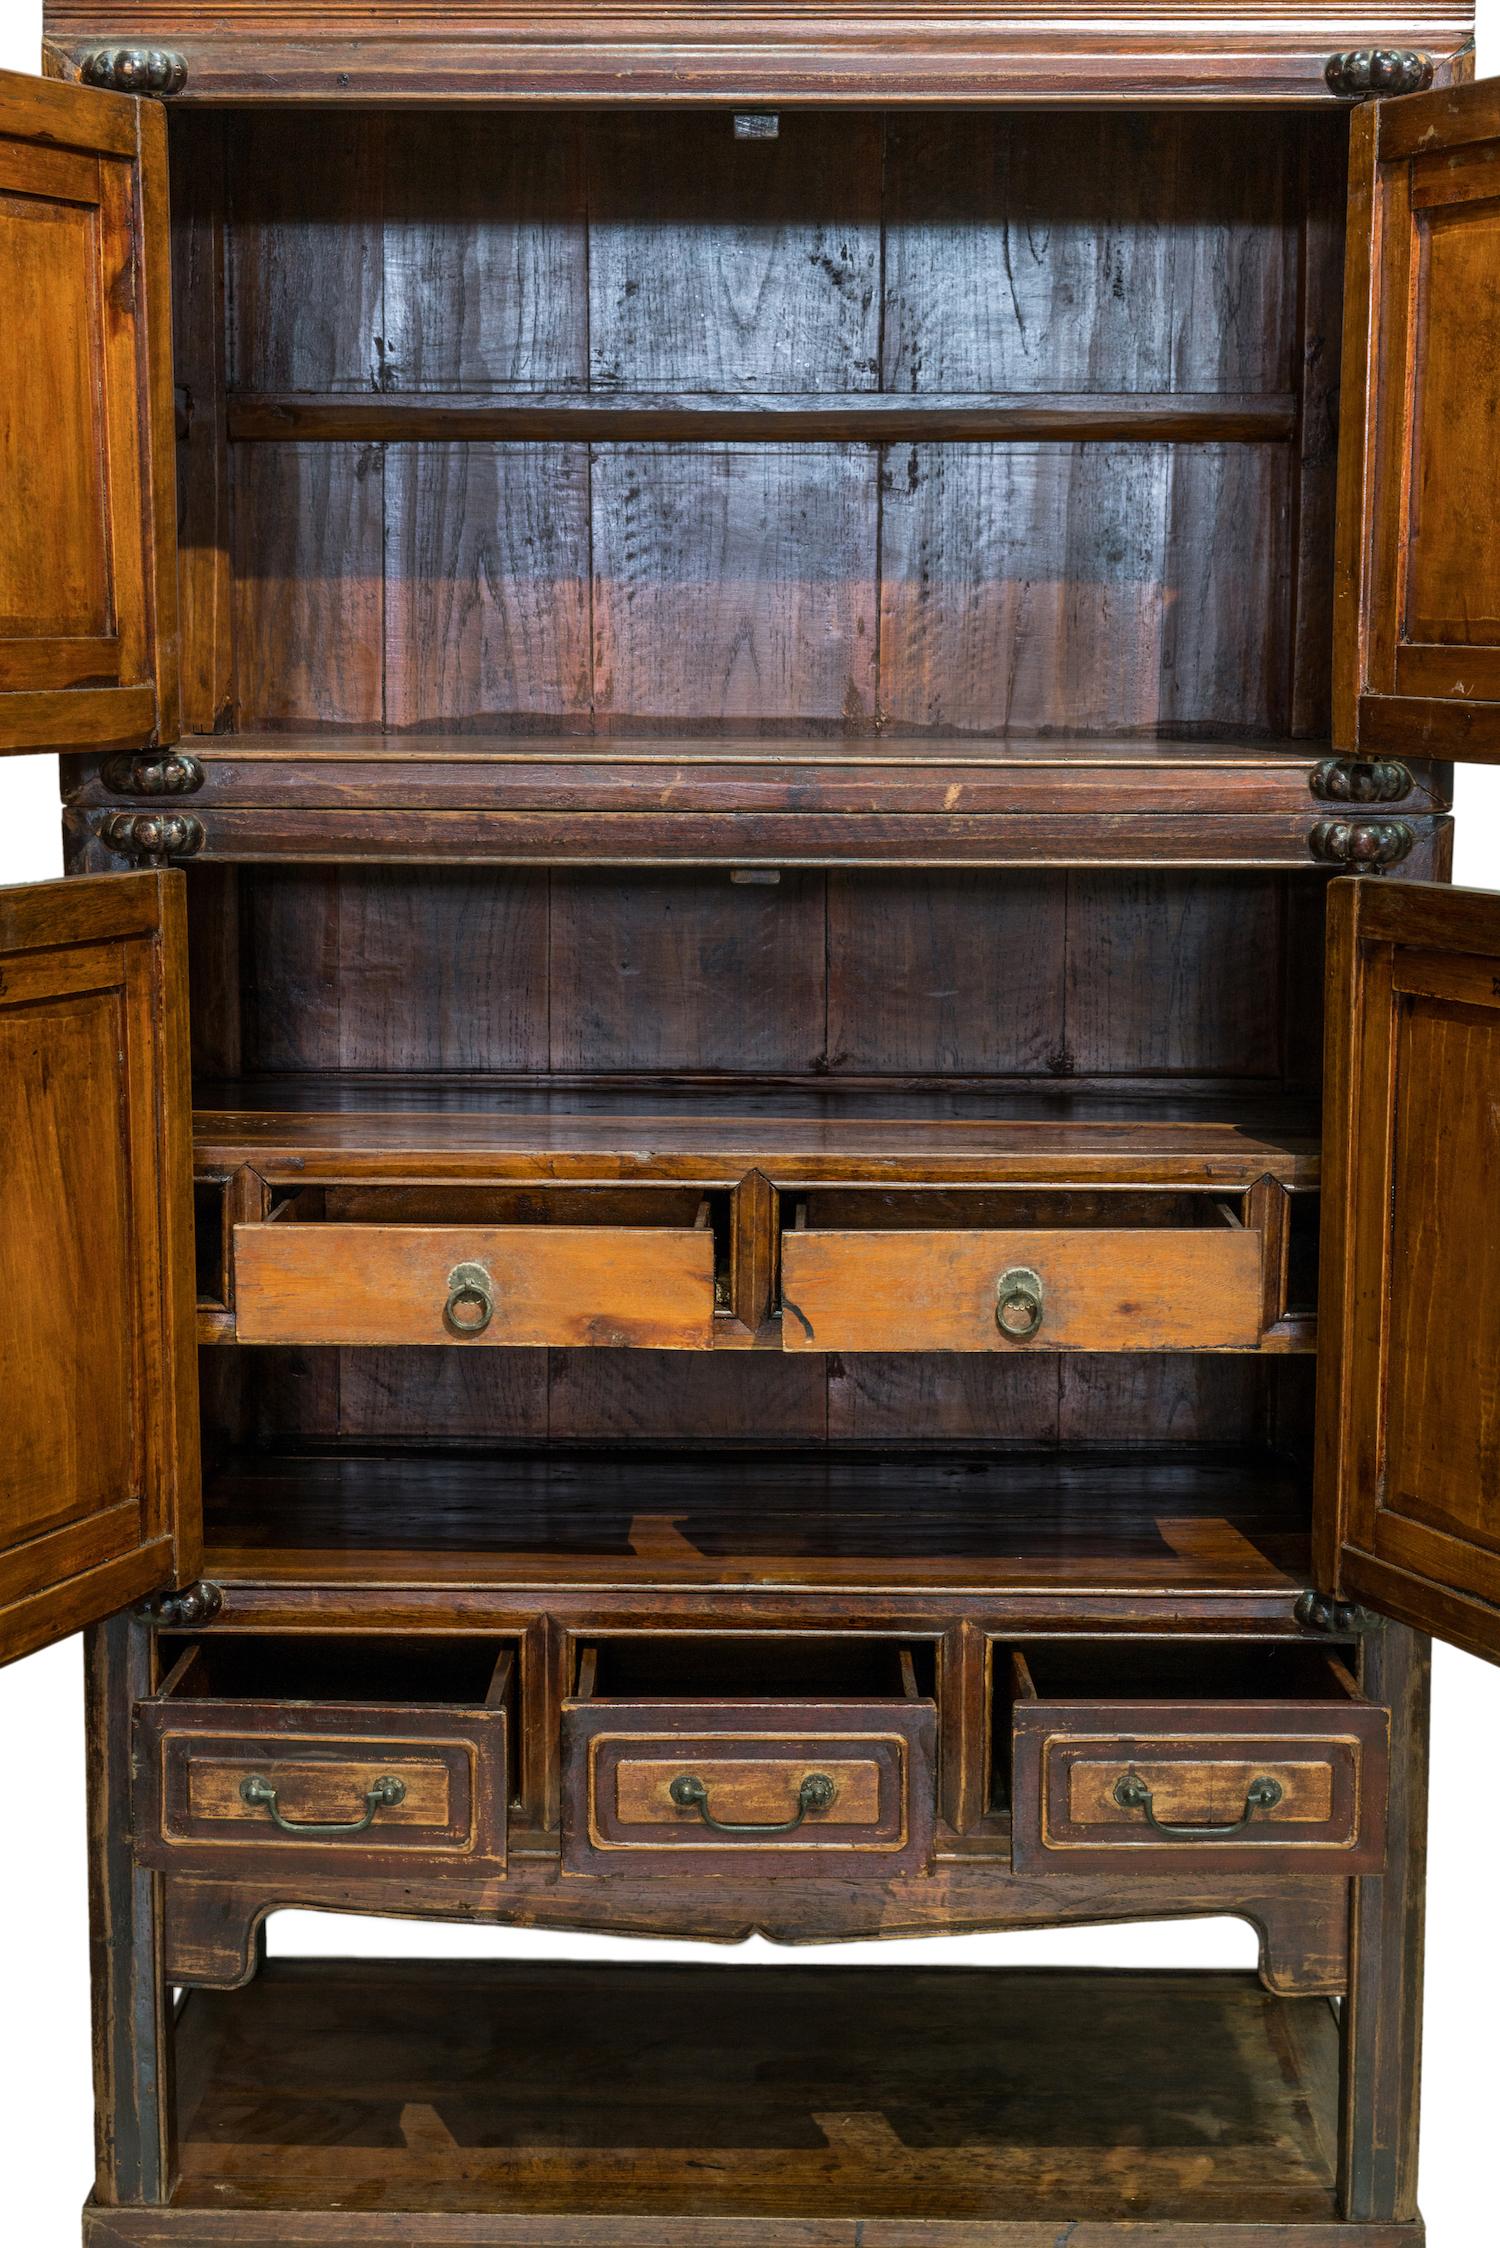 3-Part Chinese Book Cabinet (Qing-Dynastie)